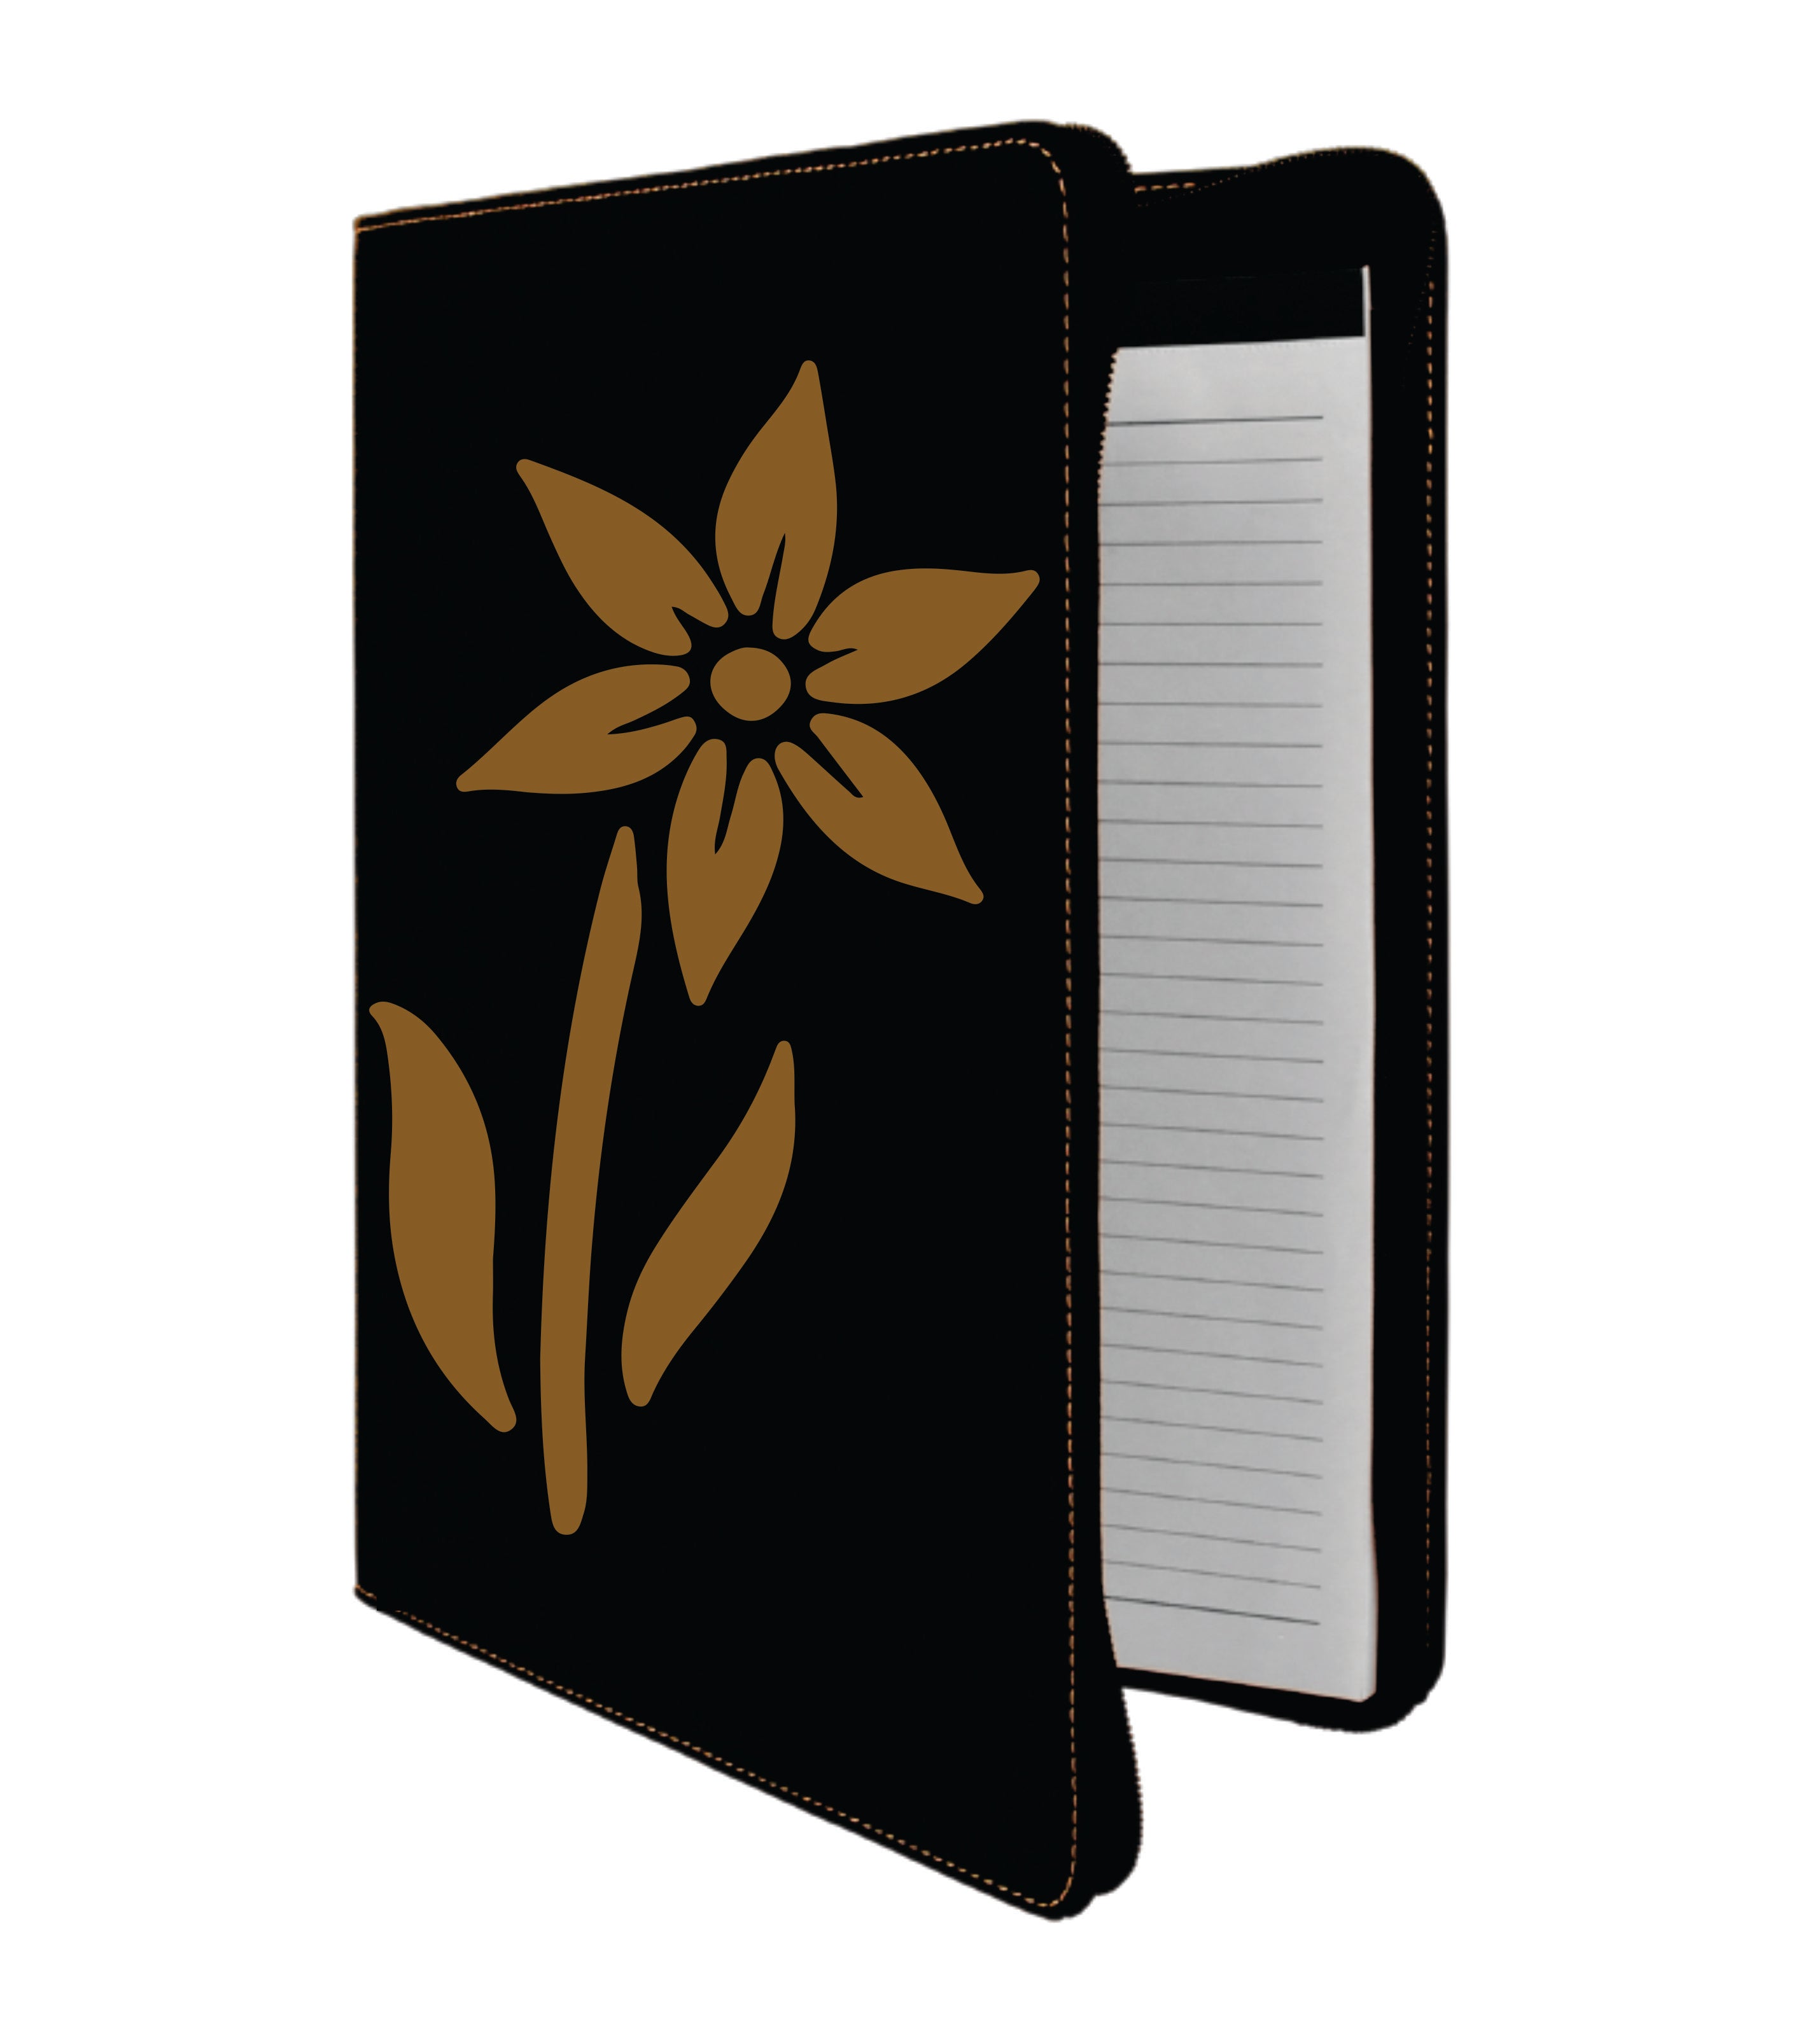 9 1/2" x 12" Laserable Leatherette Portfolio with Notepad and Zipper